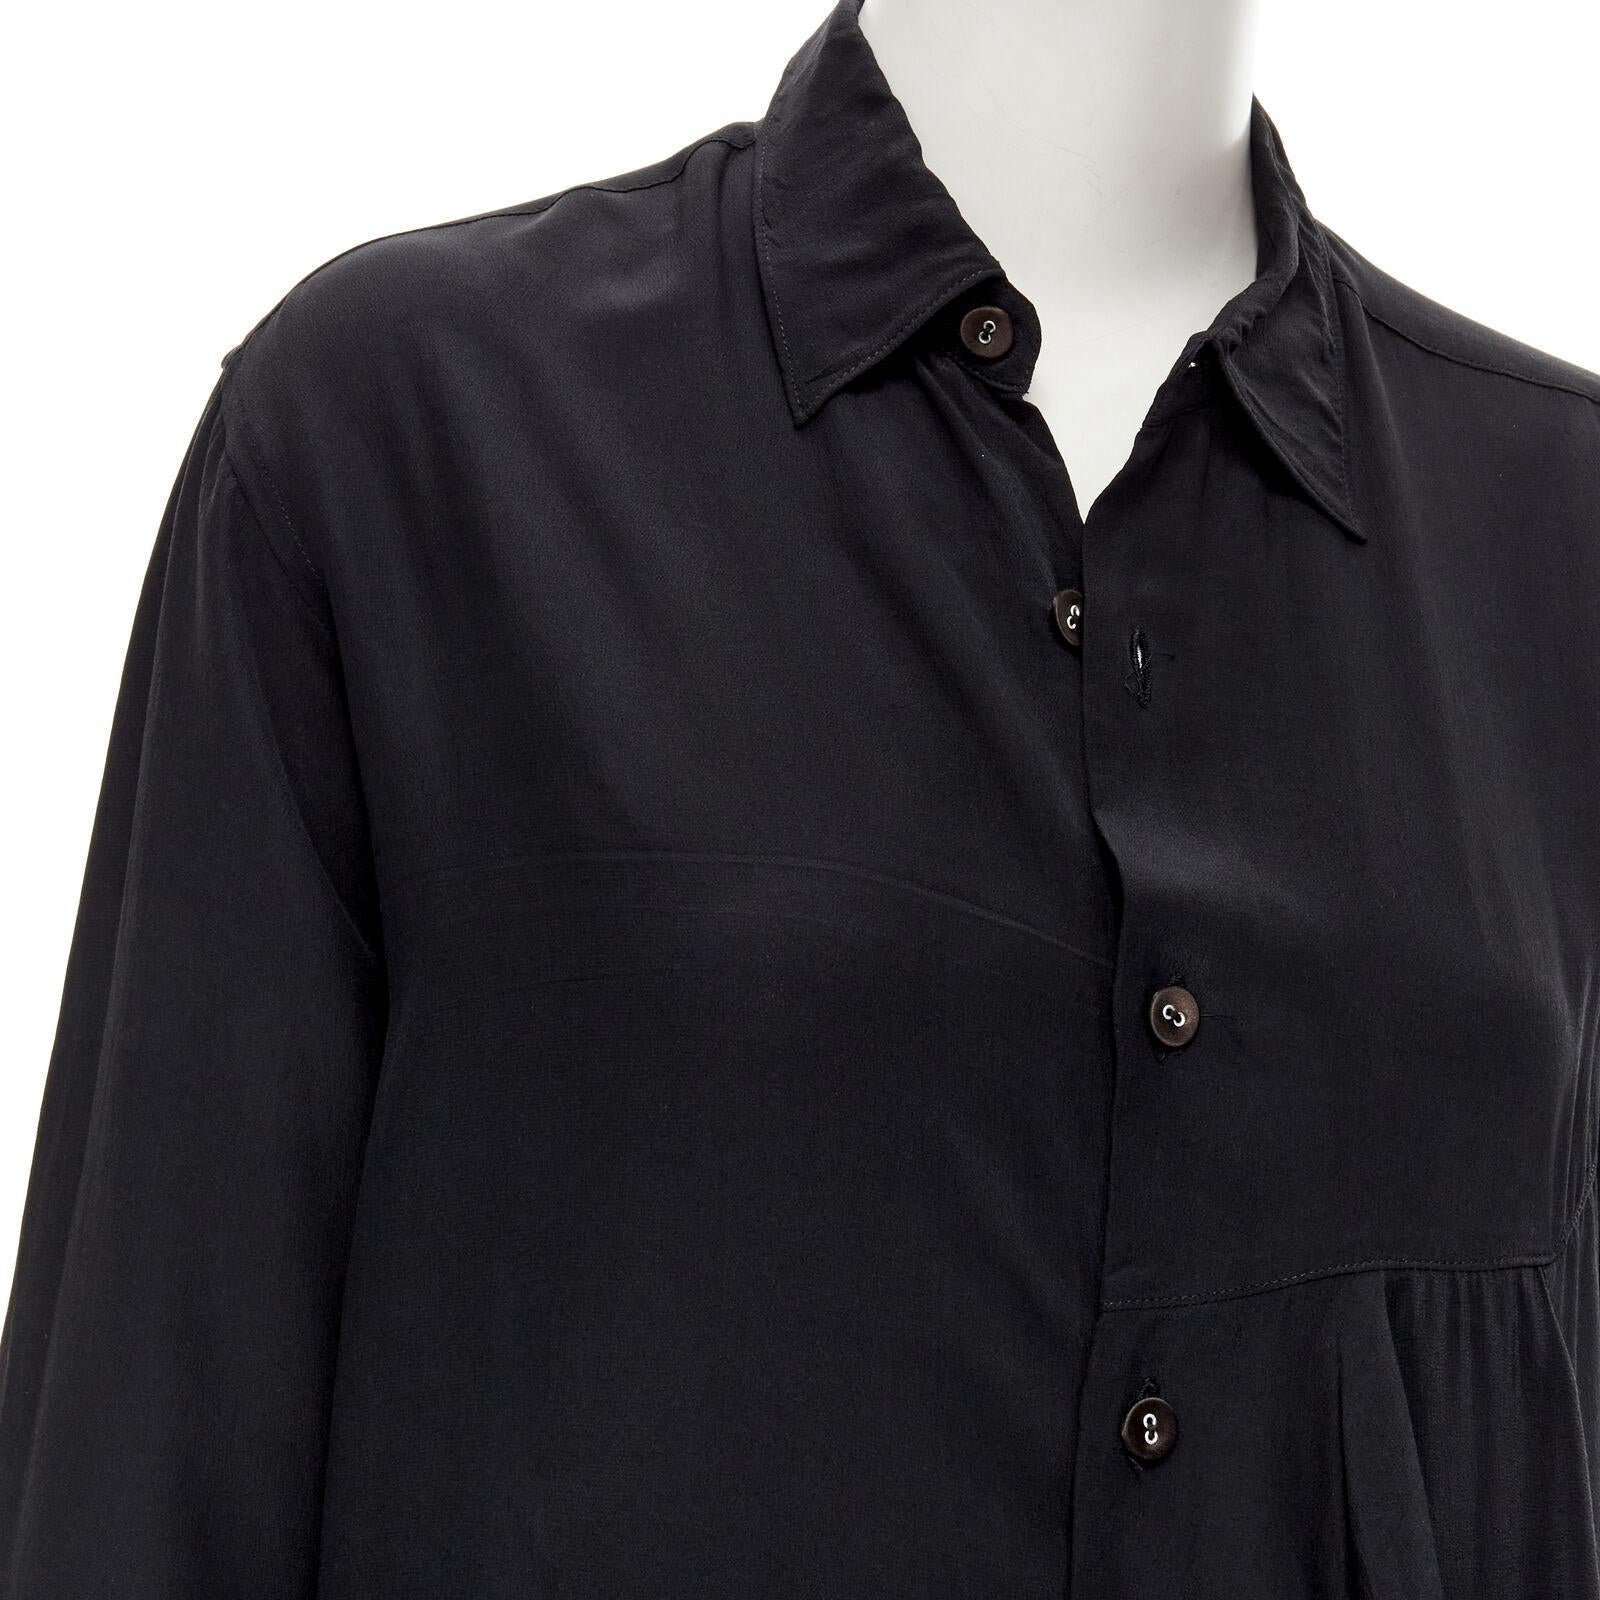 COMME DES GARCONS 1980's Vintage black waterfall draped chandelier jewel shirt For Sale 2